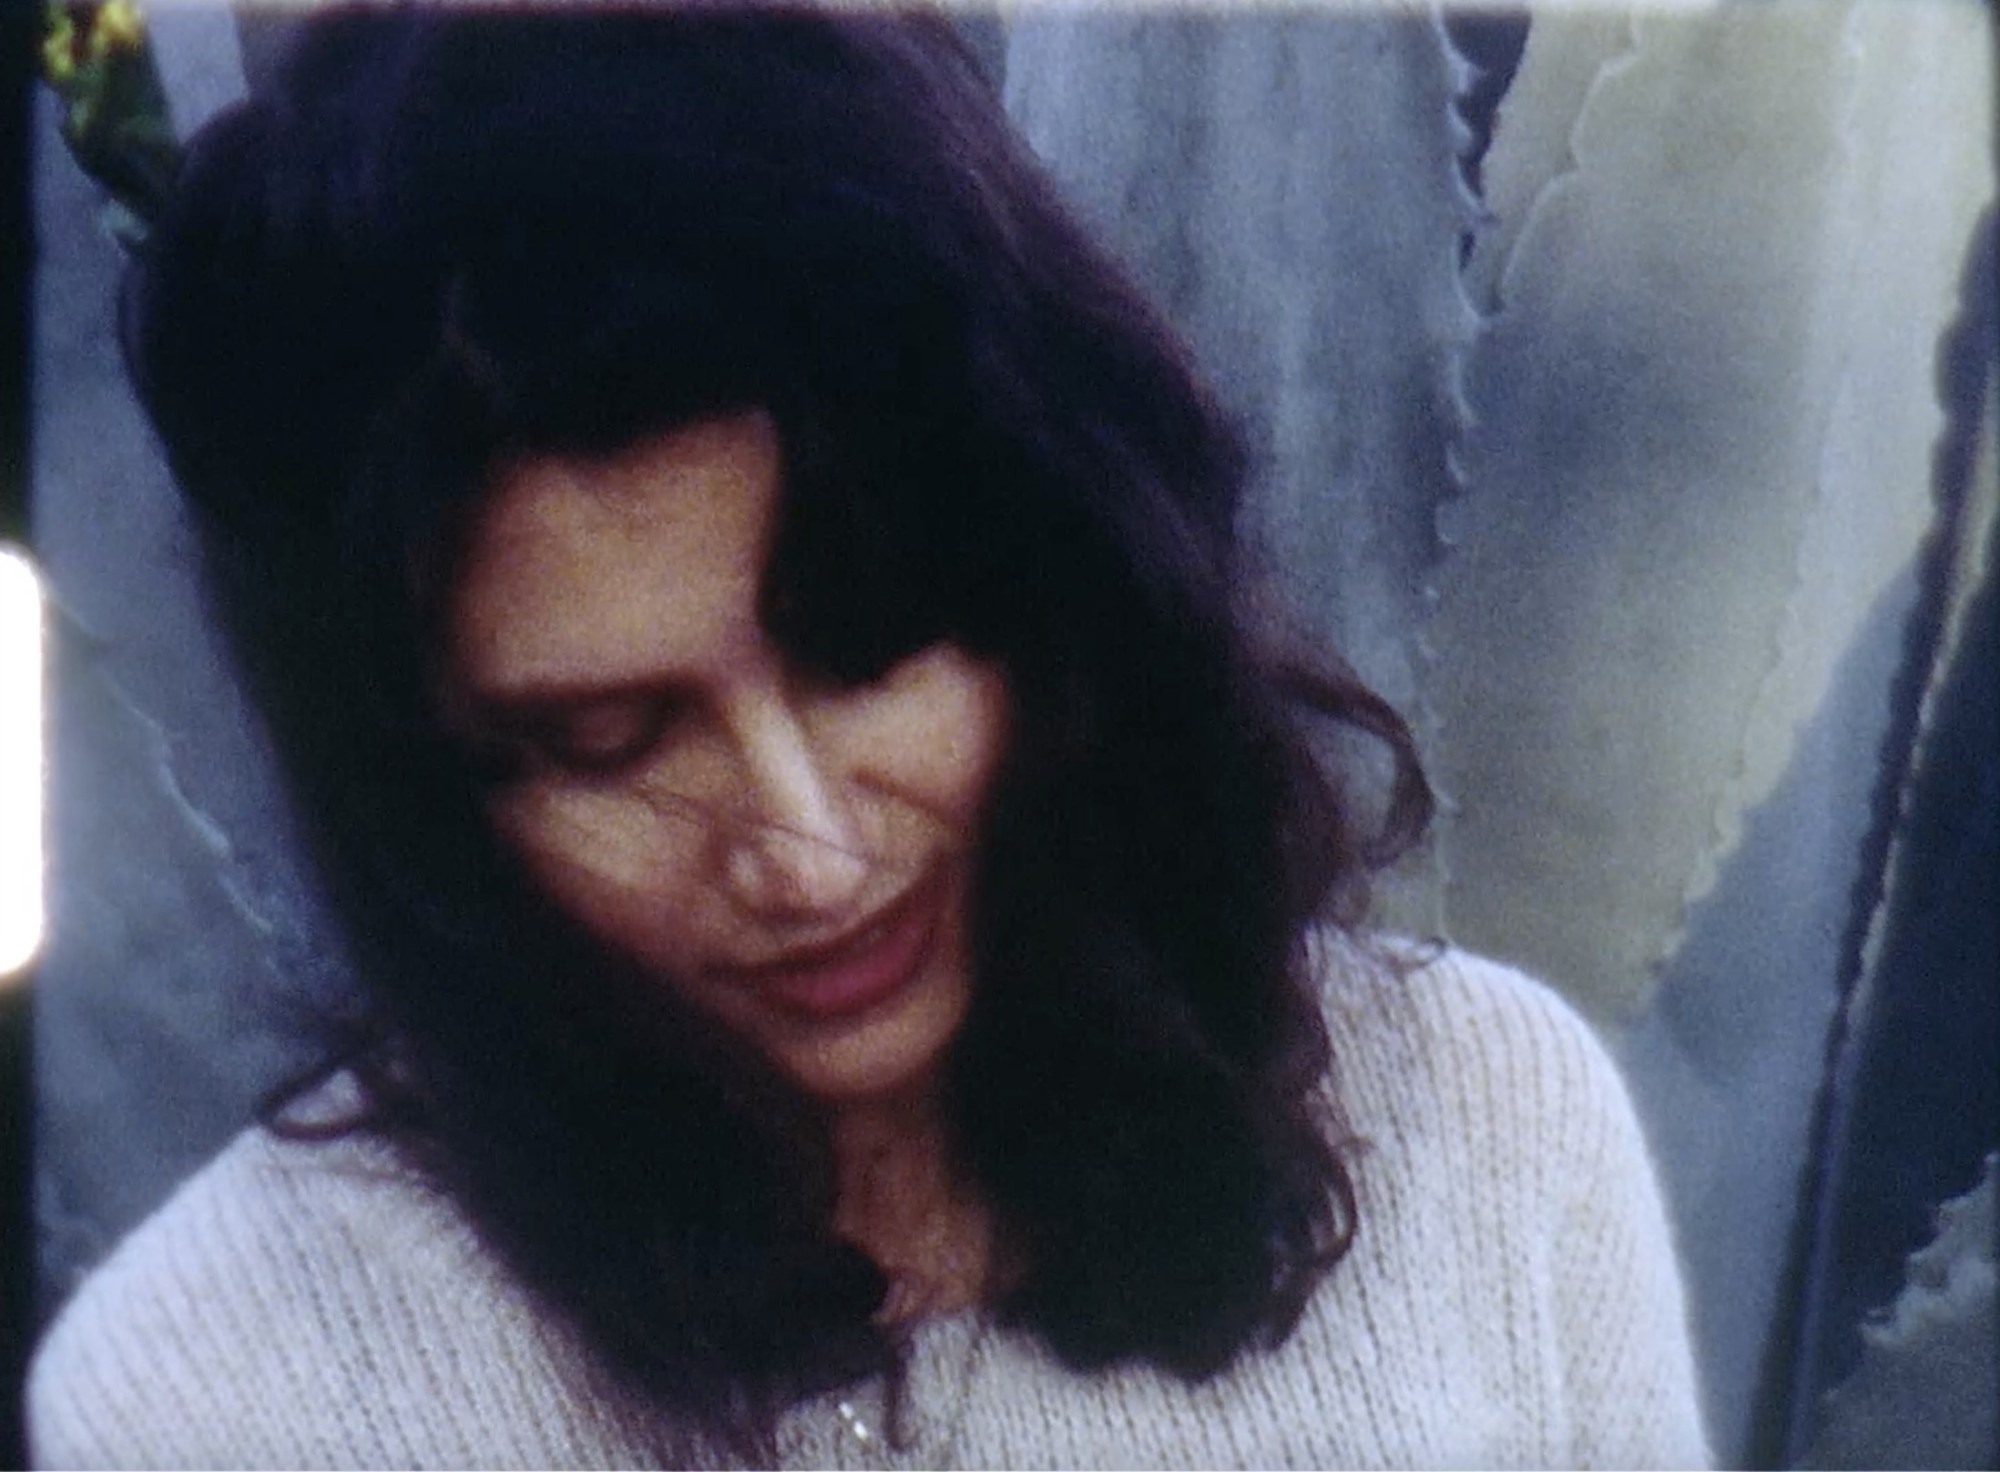 Tatiana, a femme presenting non-Black Latinx person with shoulder length dark brown hair and dark red lipstick, is outside on a windy, late afternoon, looking downwards and smiling slightly. They are wearing a knitted oatmeal colored sweater and standing in front of a massive agave plant. The image is a film still from a Super 8mm film: it is grainy, and a sprocket is visible on the left hand side.